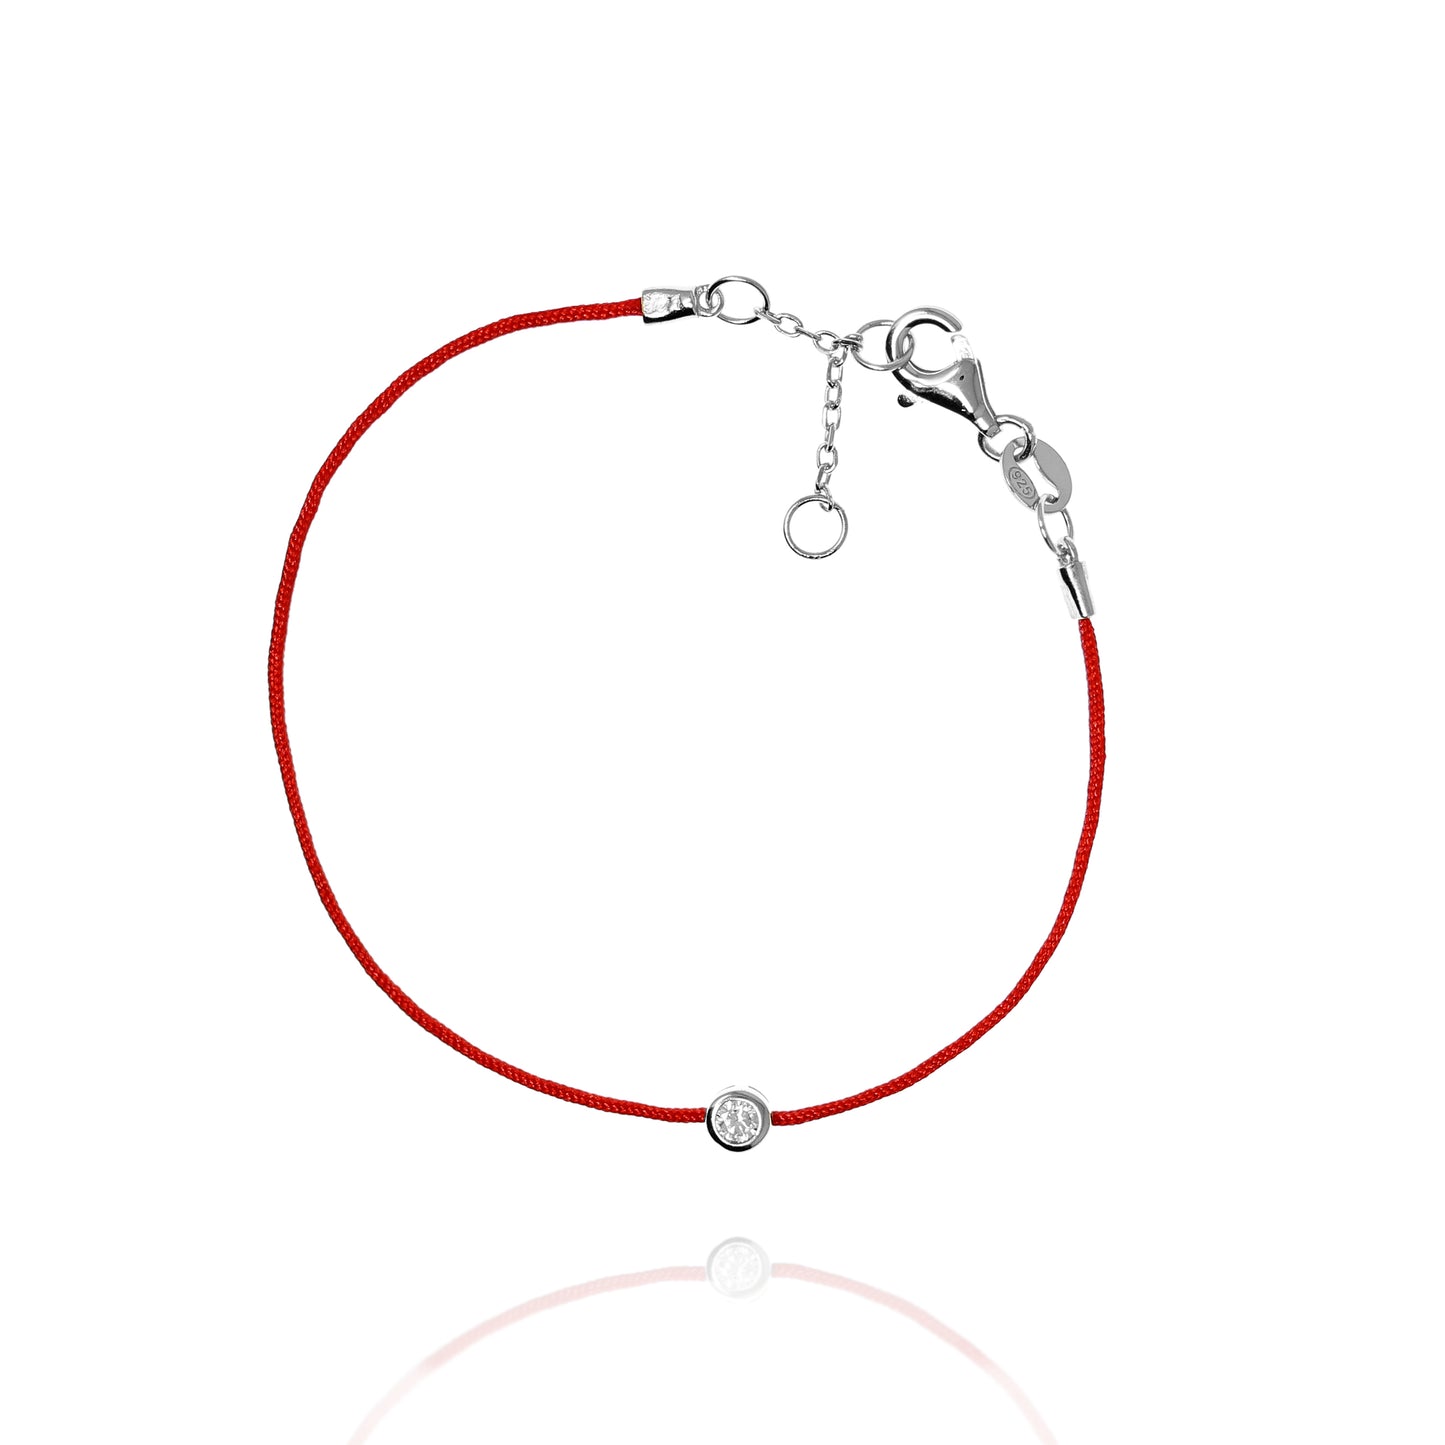 BF-15/S - Red String Bracelet with Small CZ